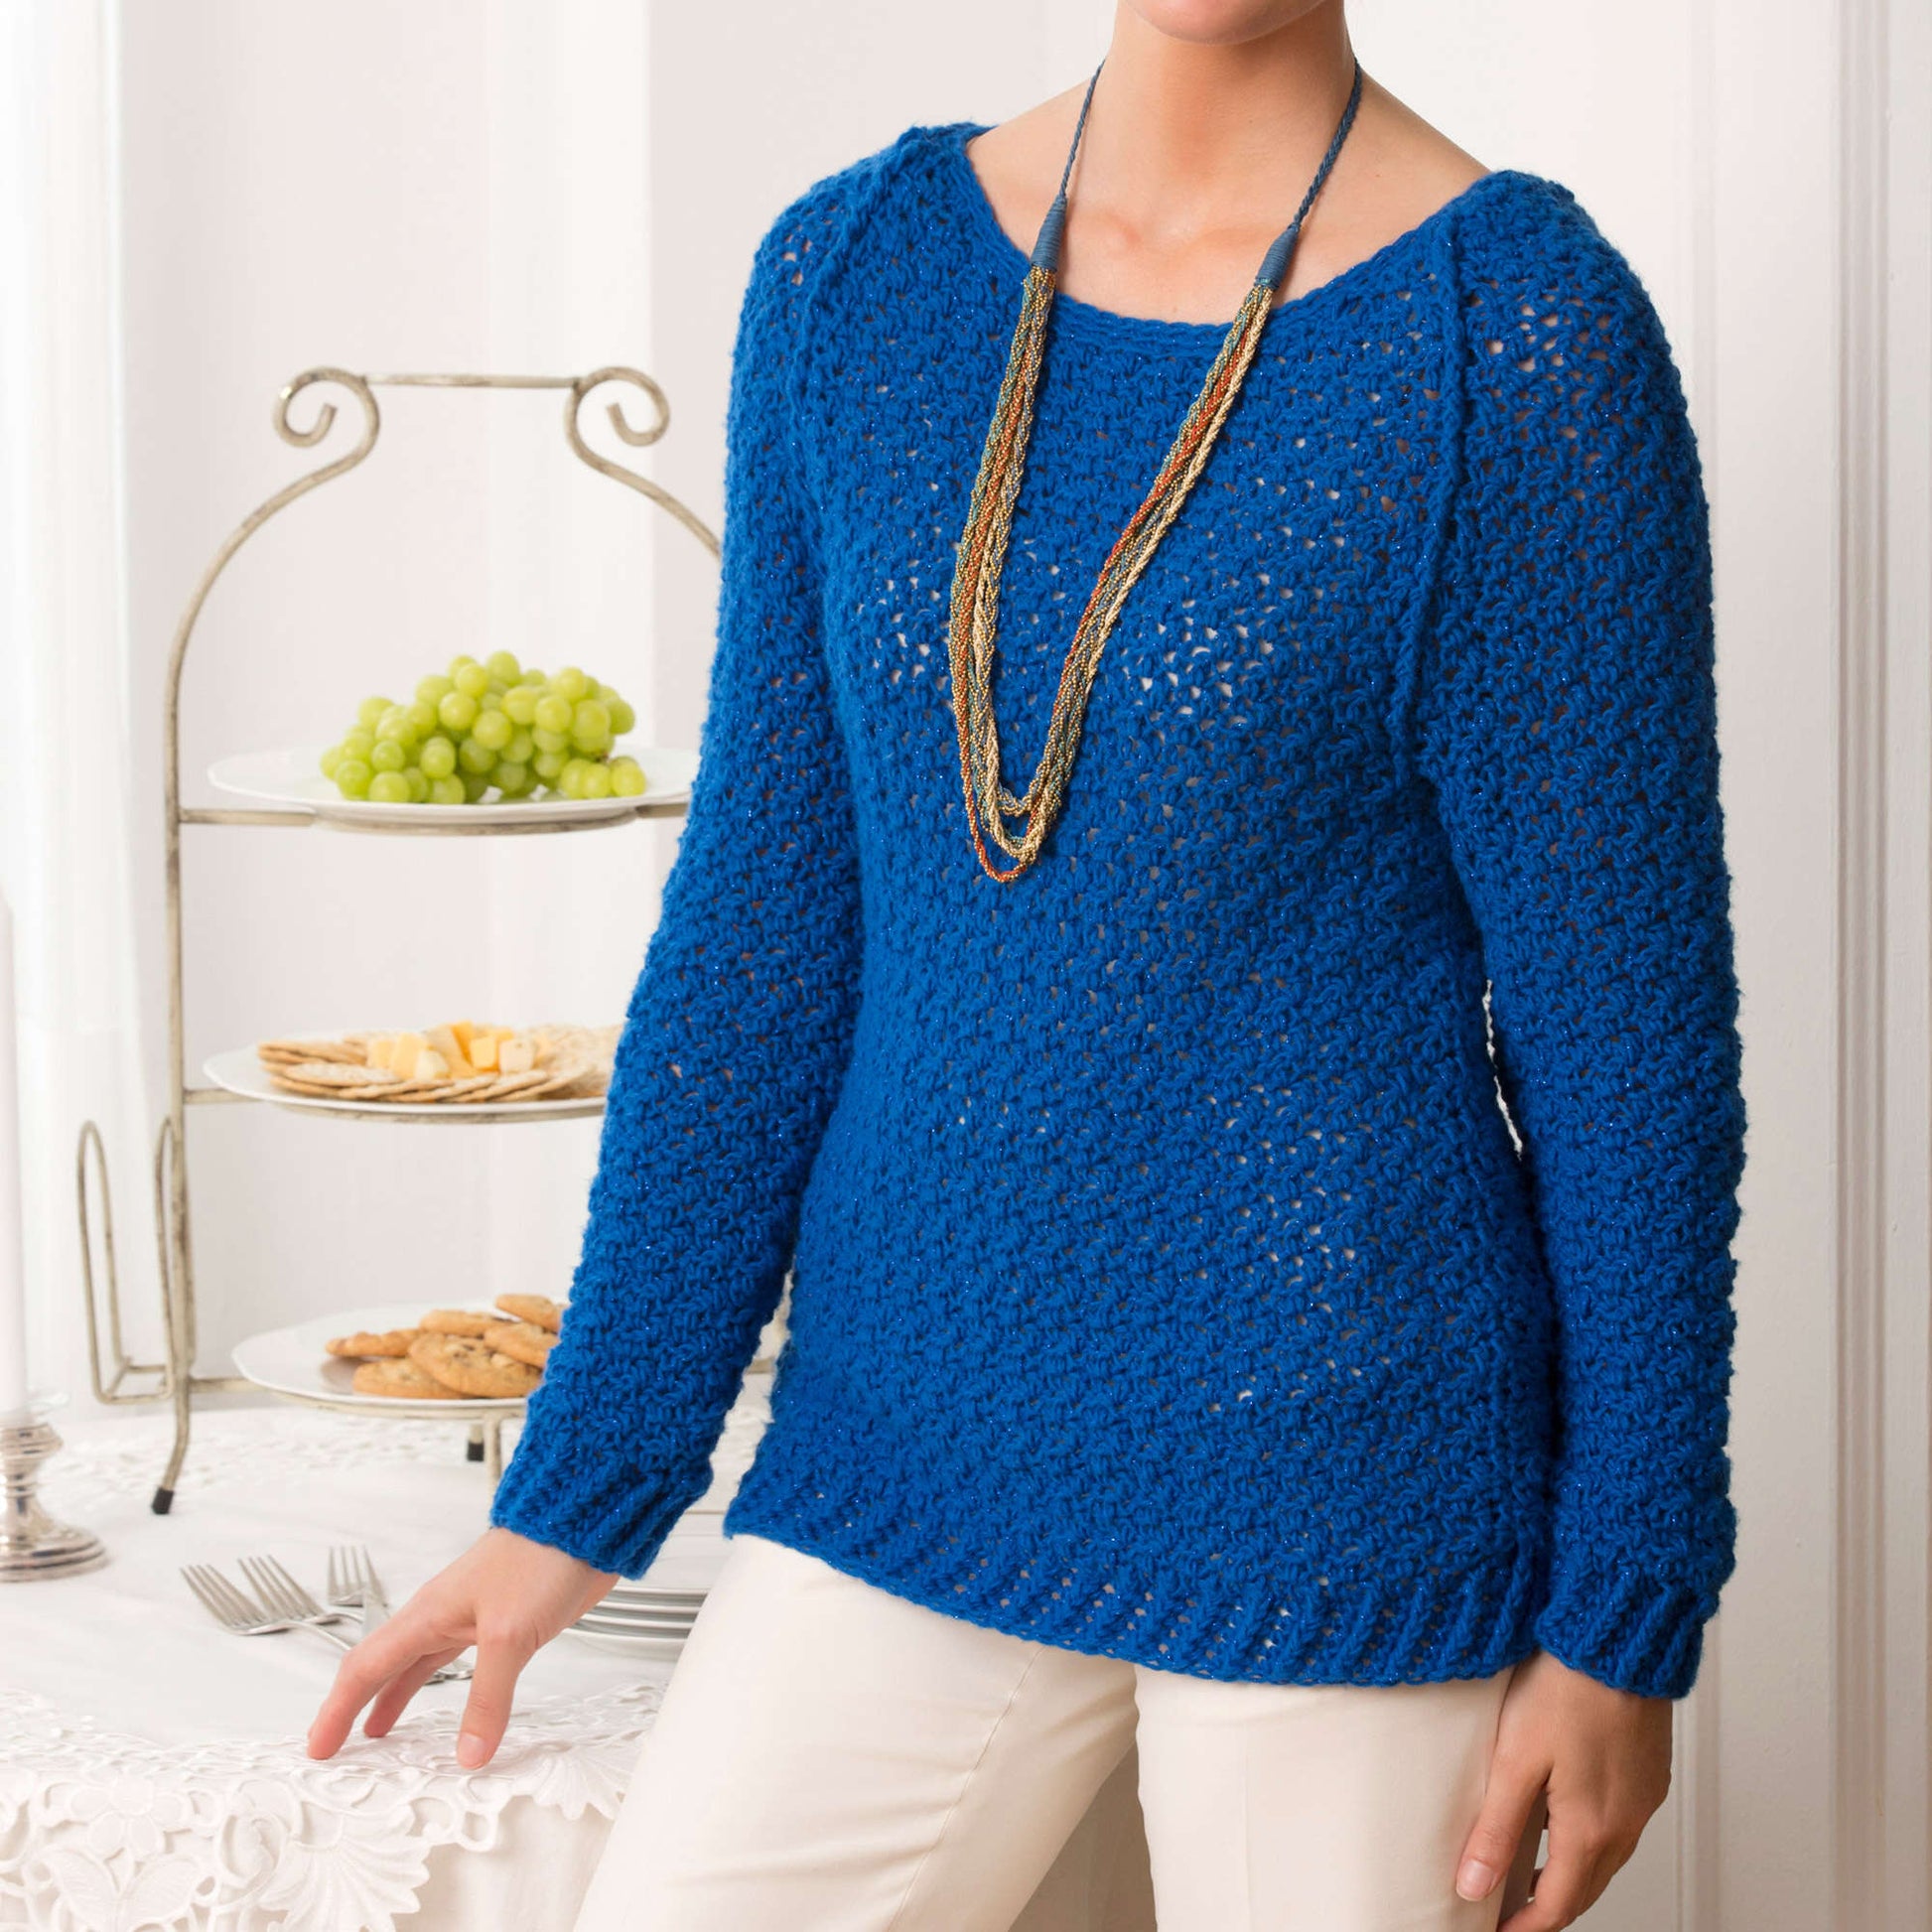 Free Red Heart Holiday Sparkle Sweater Crochet Pattern